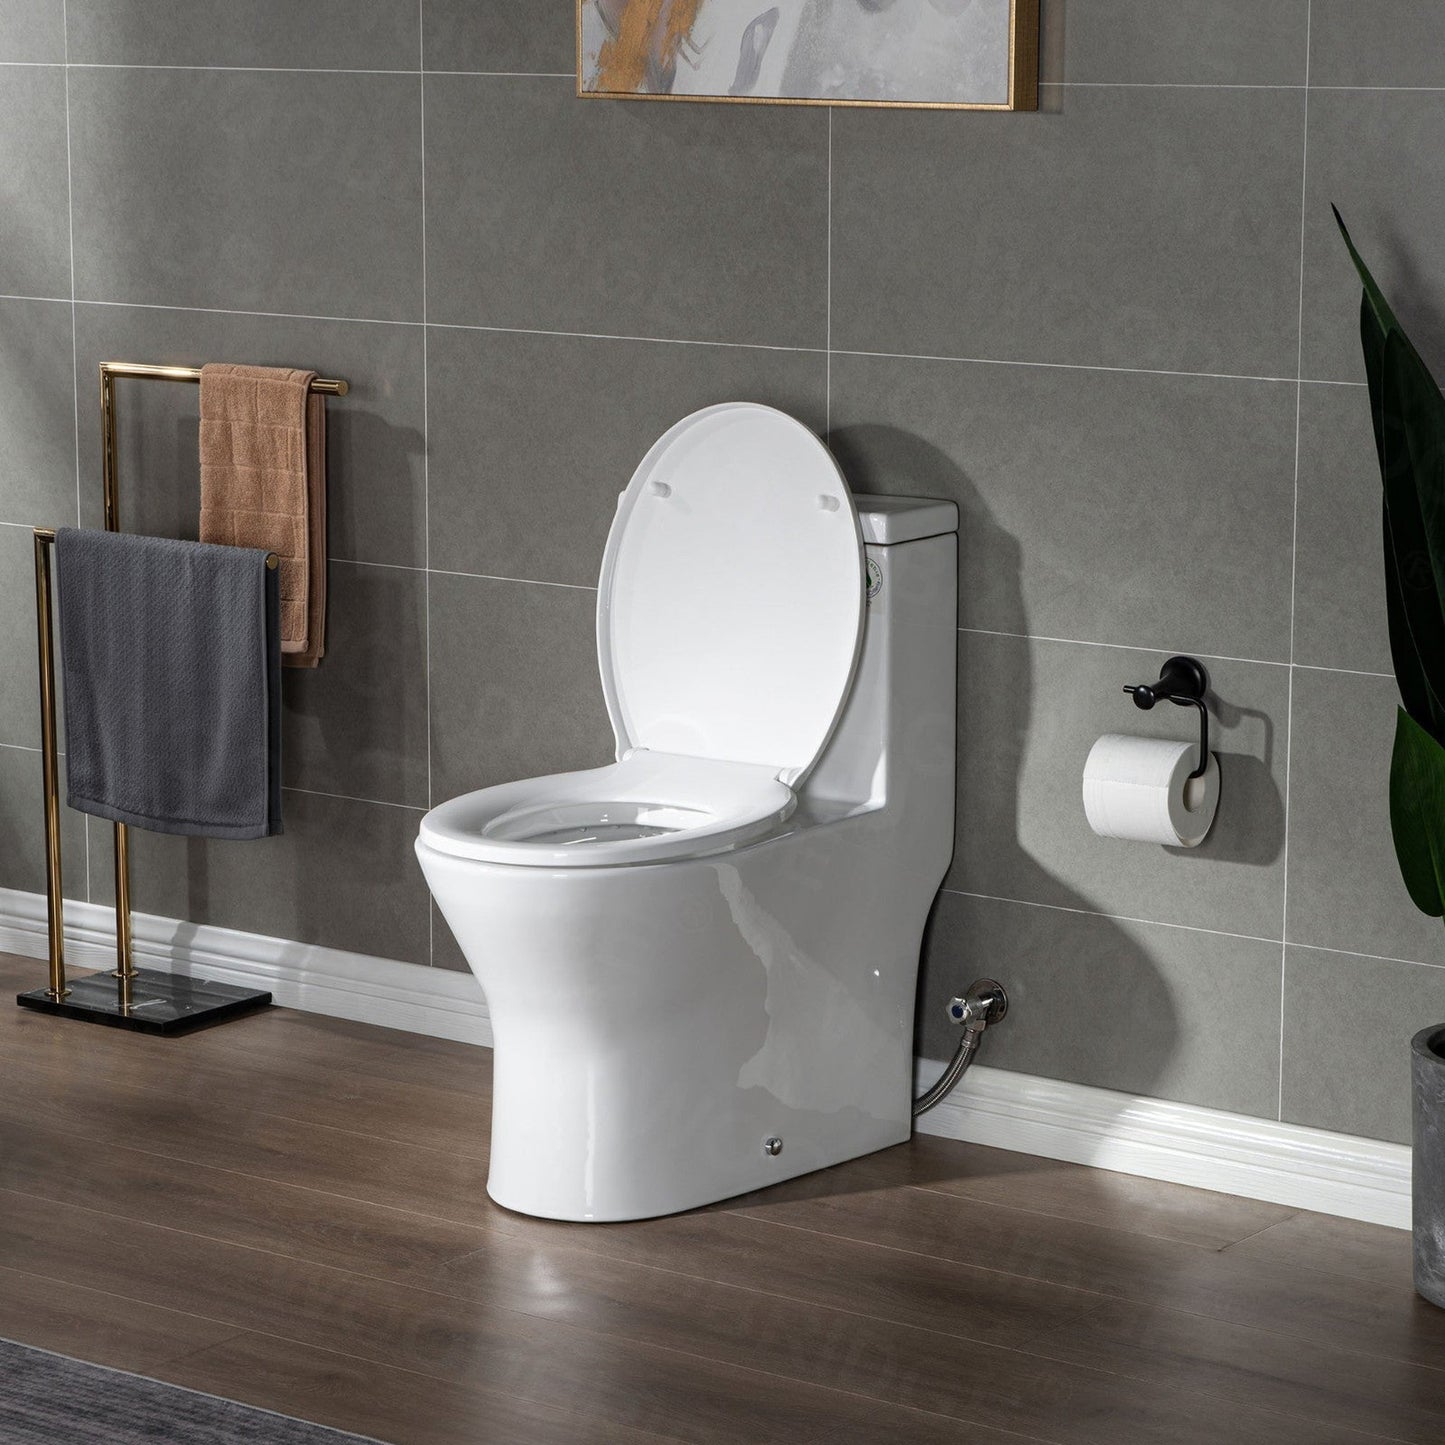 WoodBridge T0031-ORB White One Piece Short Compact Toilet Tiny Mini Commode Water Closet Dual Flush Concealed Trapway With Oil Rubbed Bronze Button